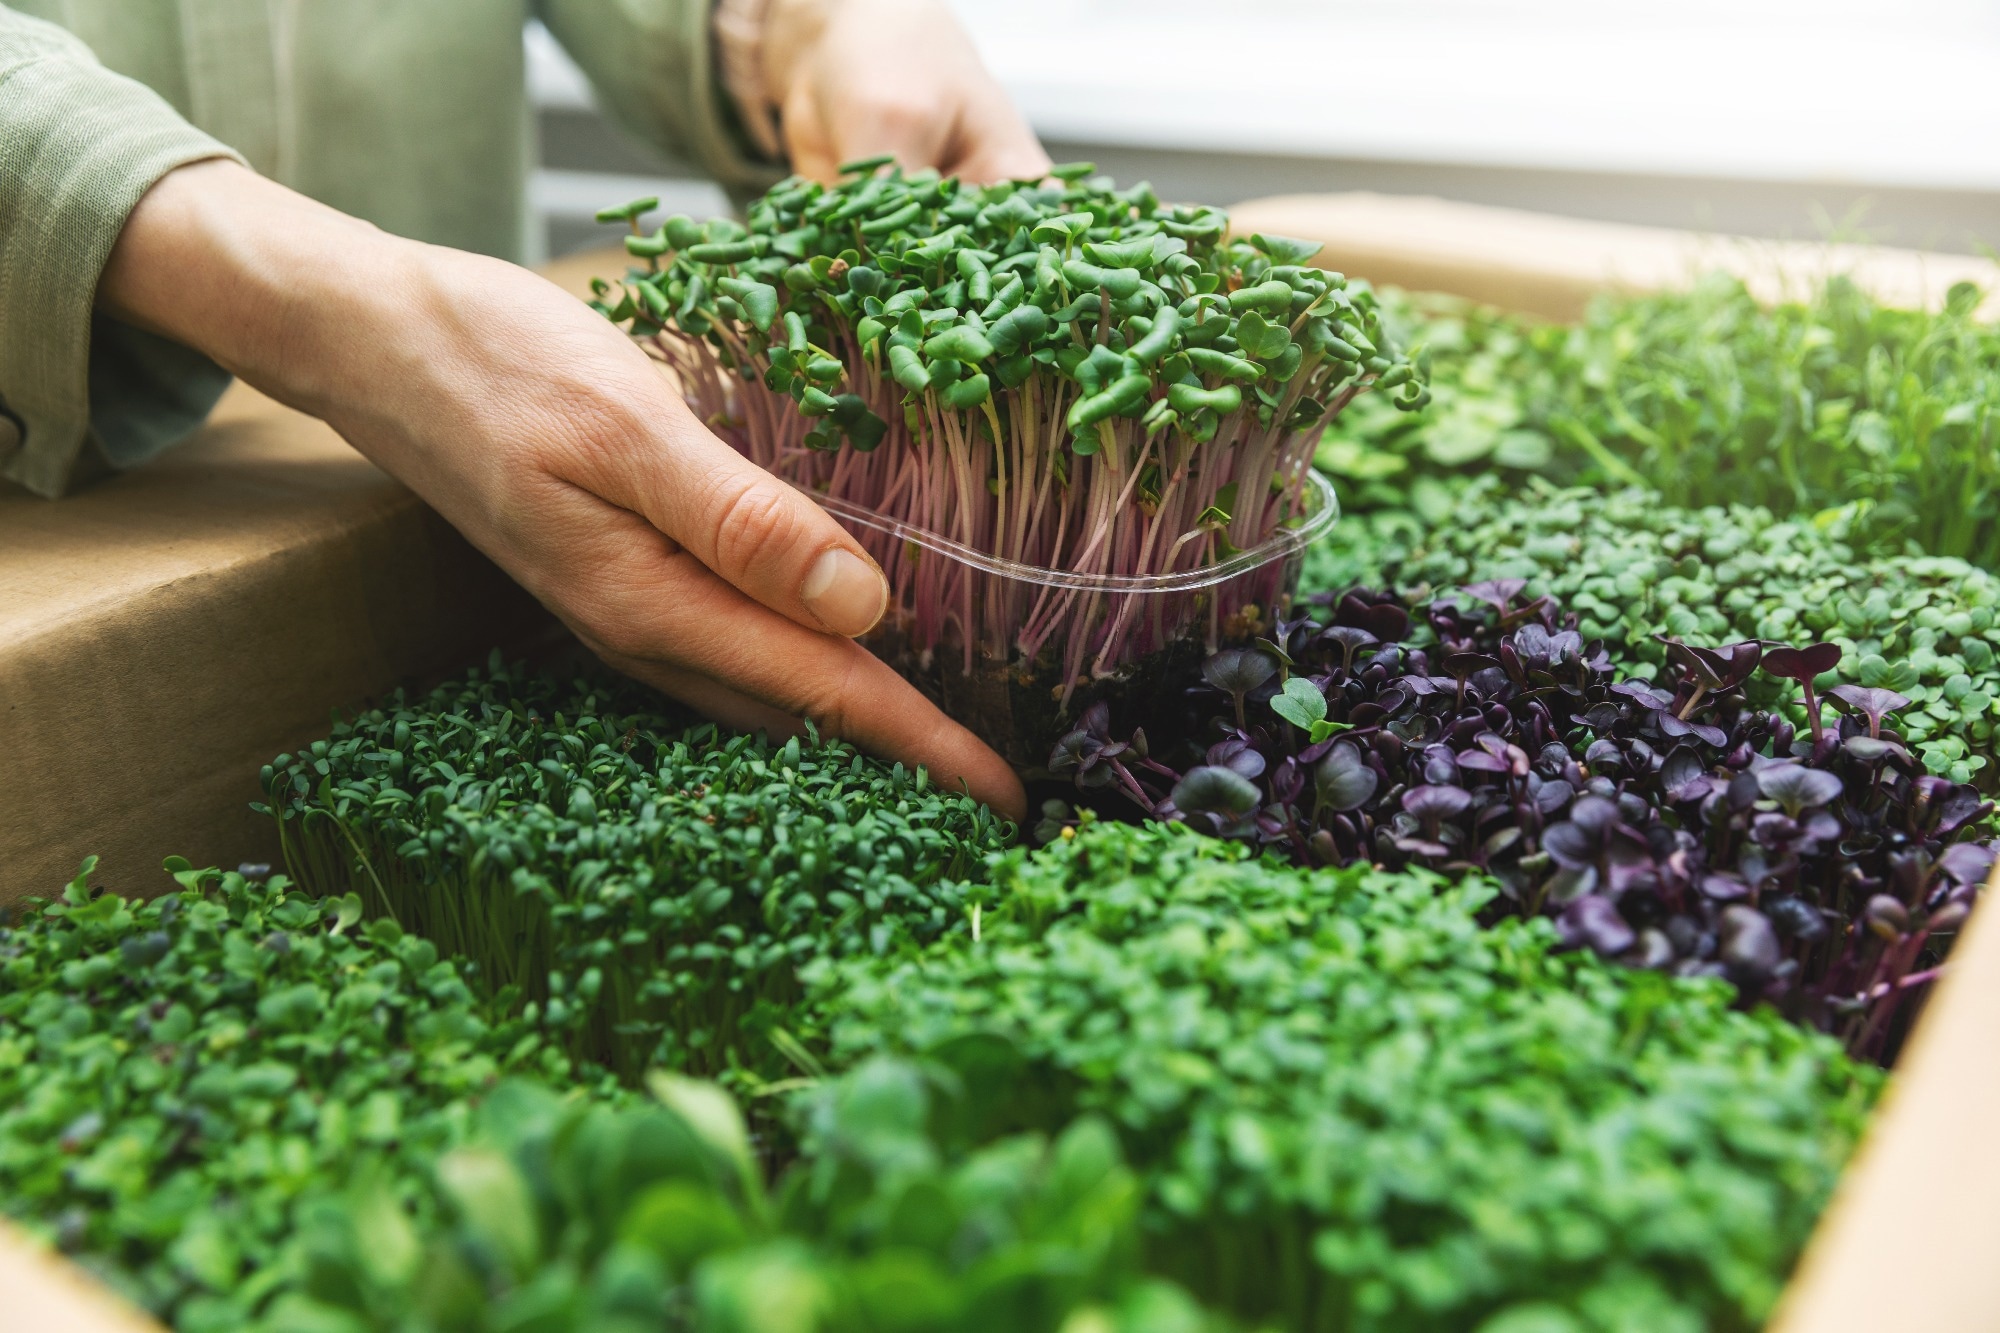 Review: Microgreens on the rise: Expanding our horizons from farm to fork. Image Credit: ronstik / Shutterstock